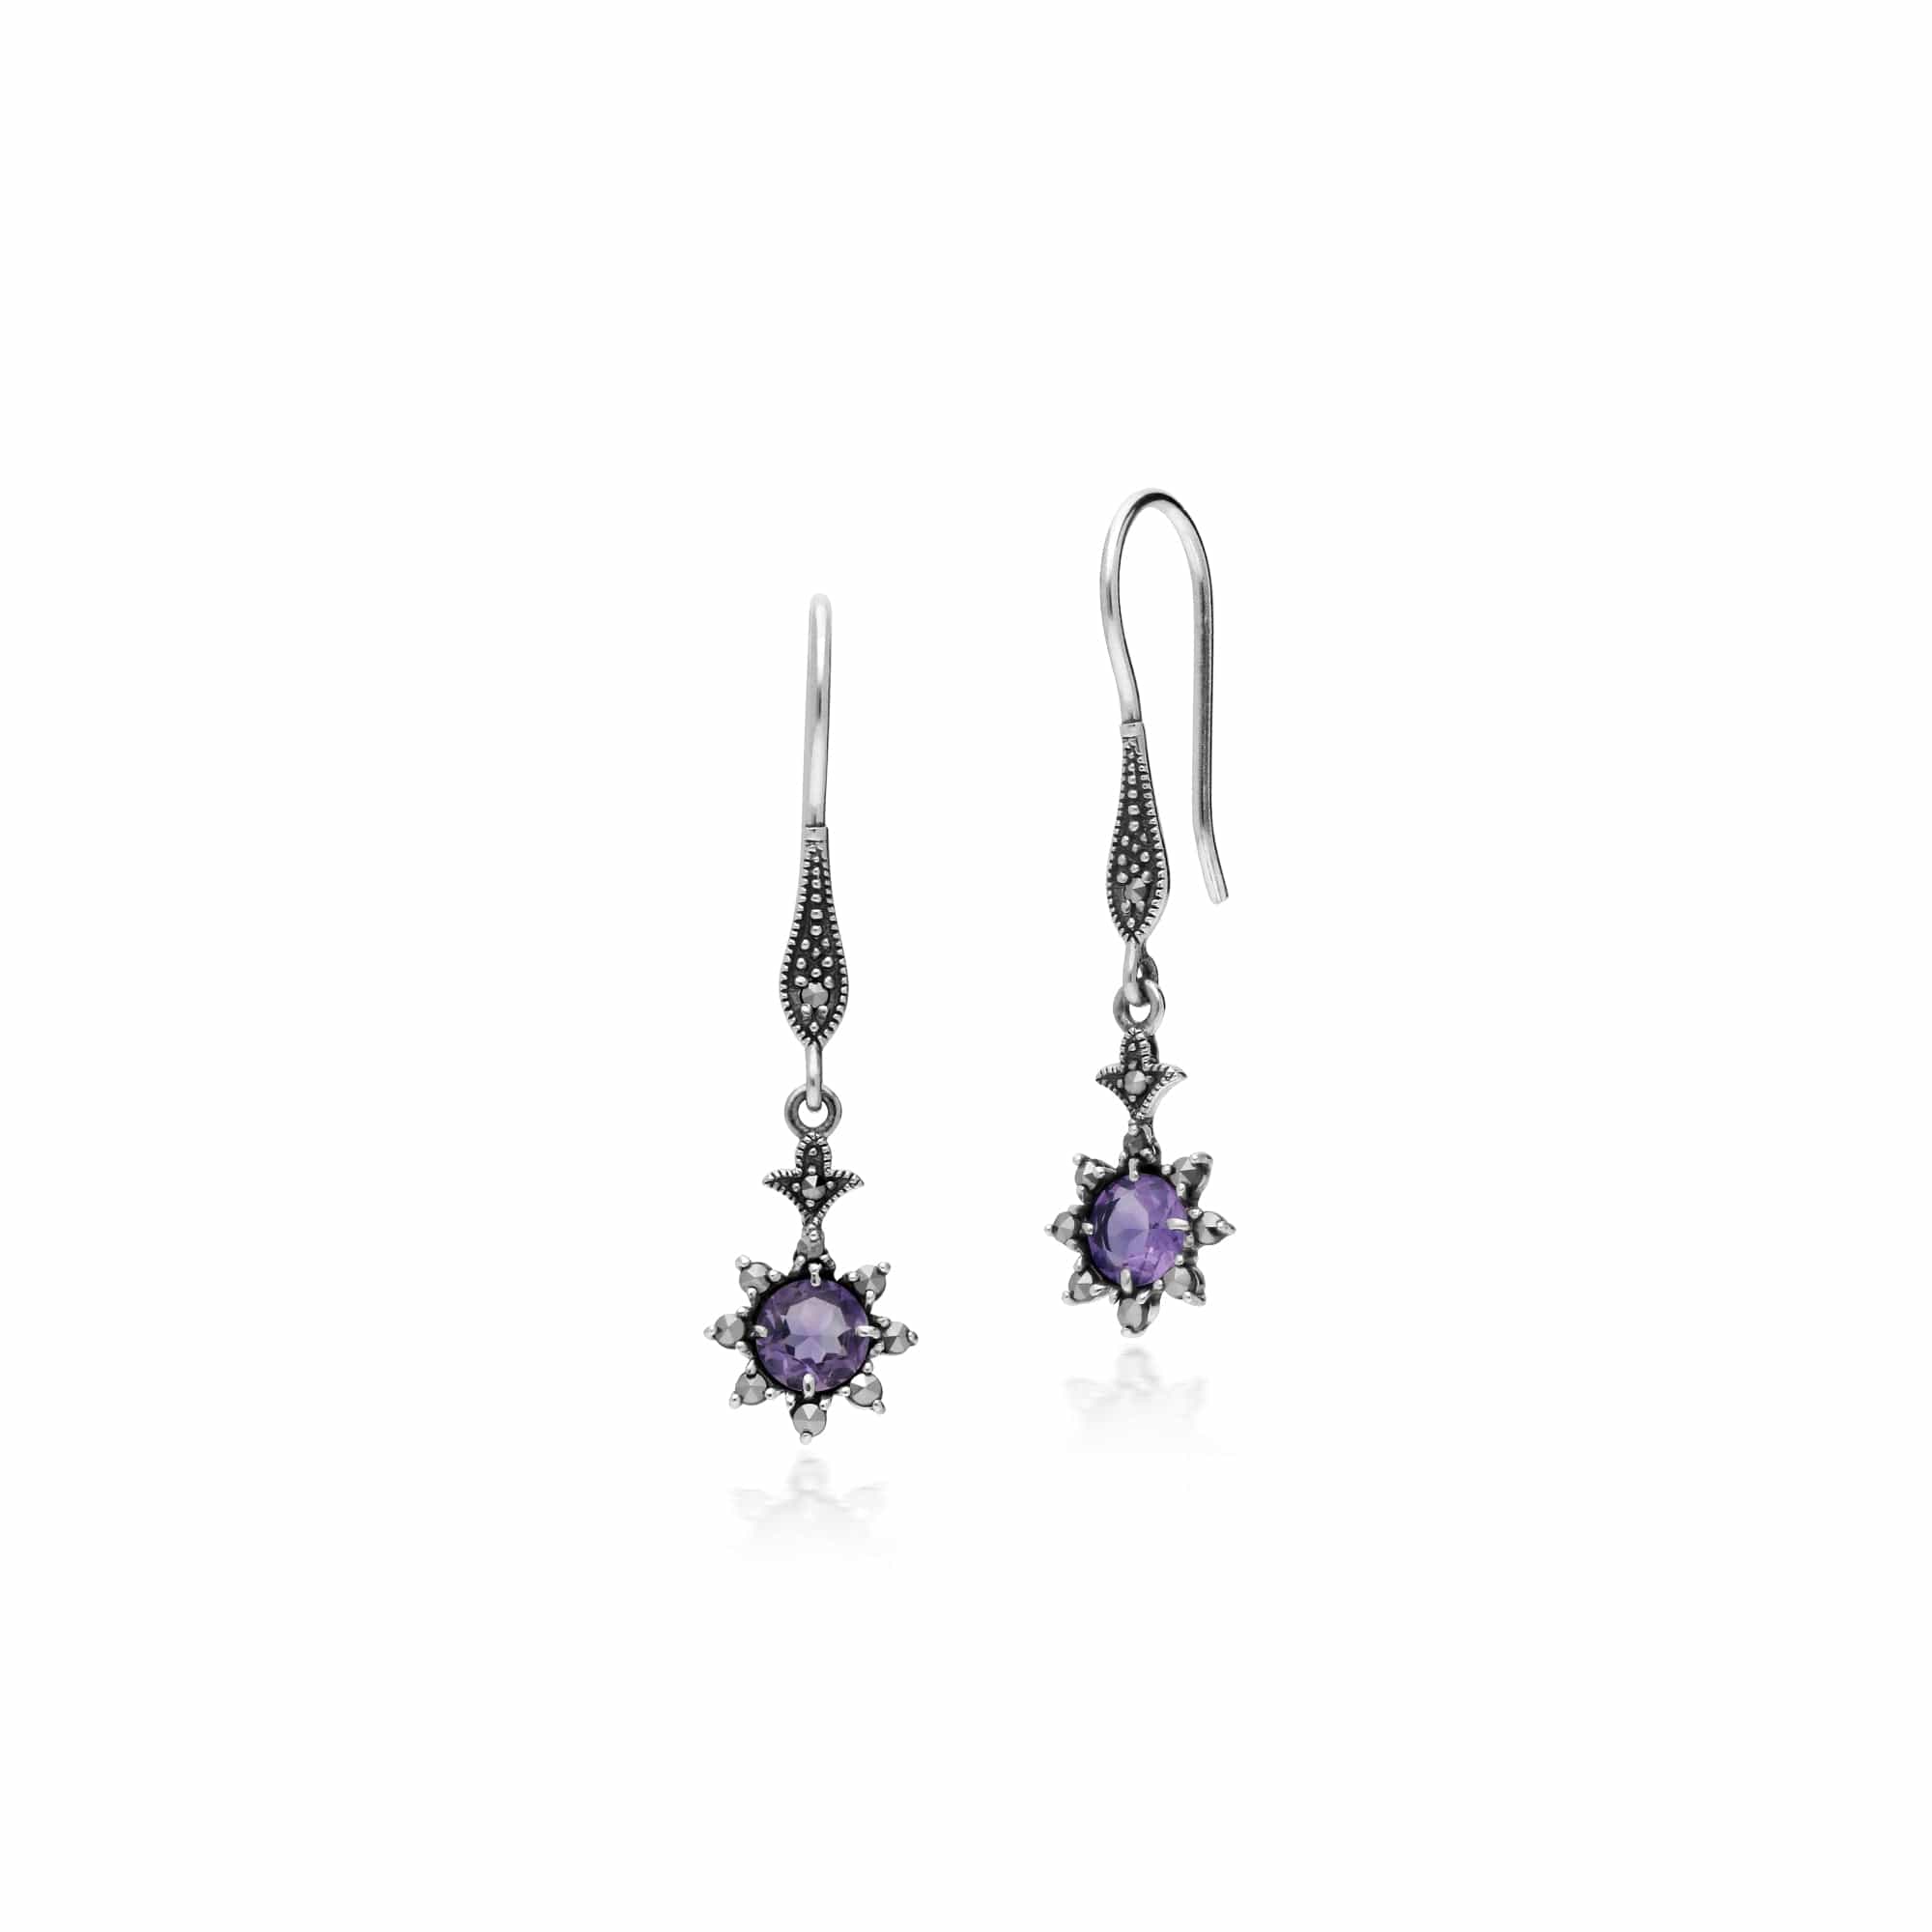 214E860602925 Floral Round Amethyst & Marcasite Drop Earrings in 925 Sterling Silver 1